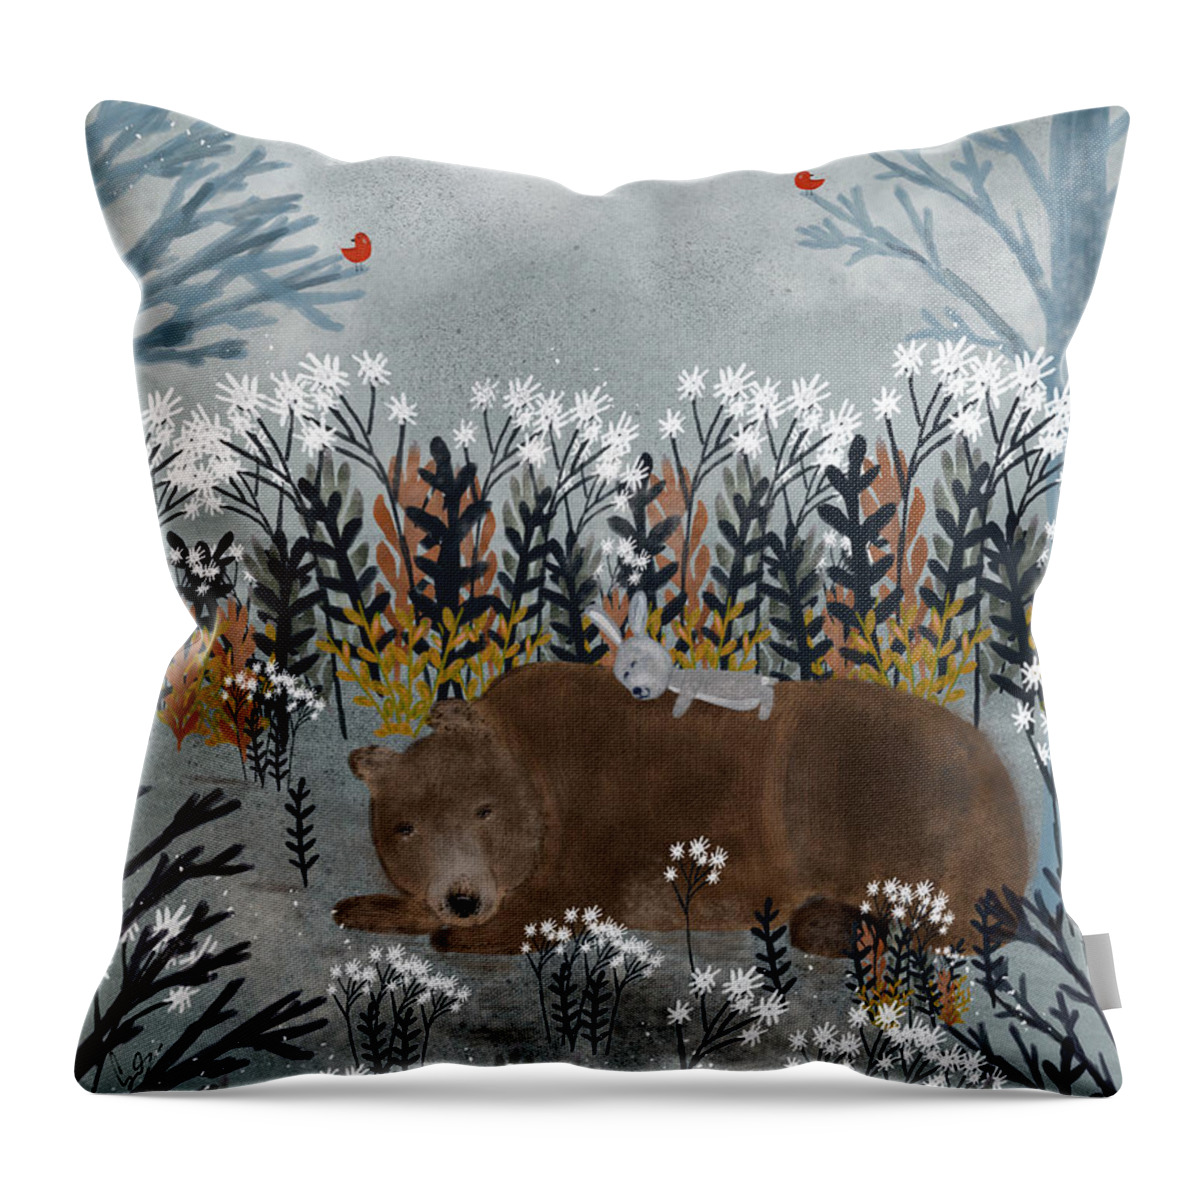 Bear Throw Pillow featuring the painting Bear And Bunny by Bri Buckley